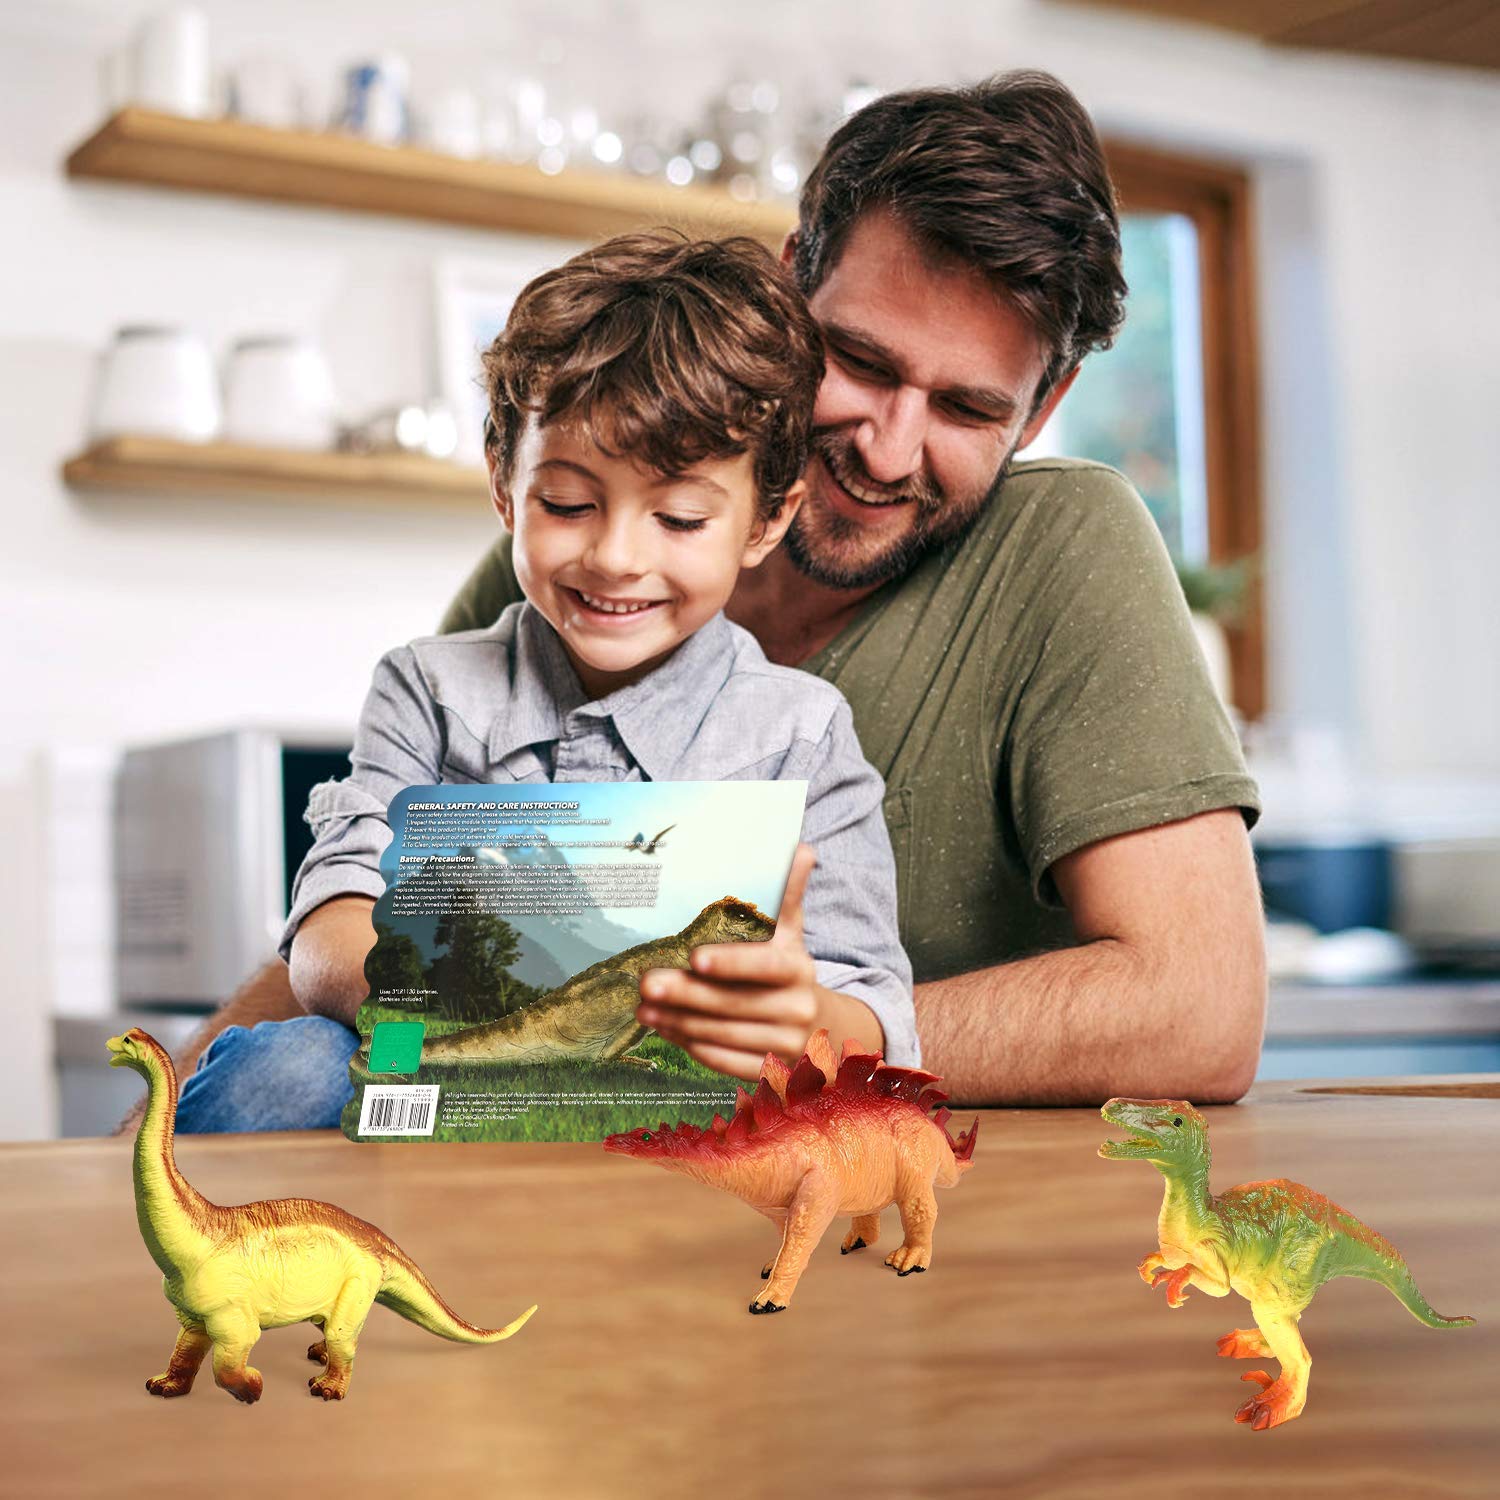 OleFun Dinosaur Toys for 3 Years Old & Up - Dinosaur Sound Book & 12 Realistic Looking Dinosaurs Figures Including T-Rex, Triceratops, Utahraptor, for Kids, Boys and Girls